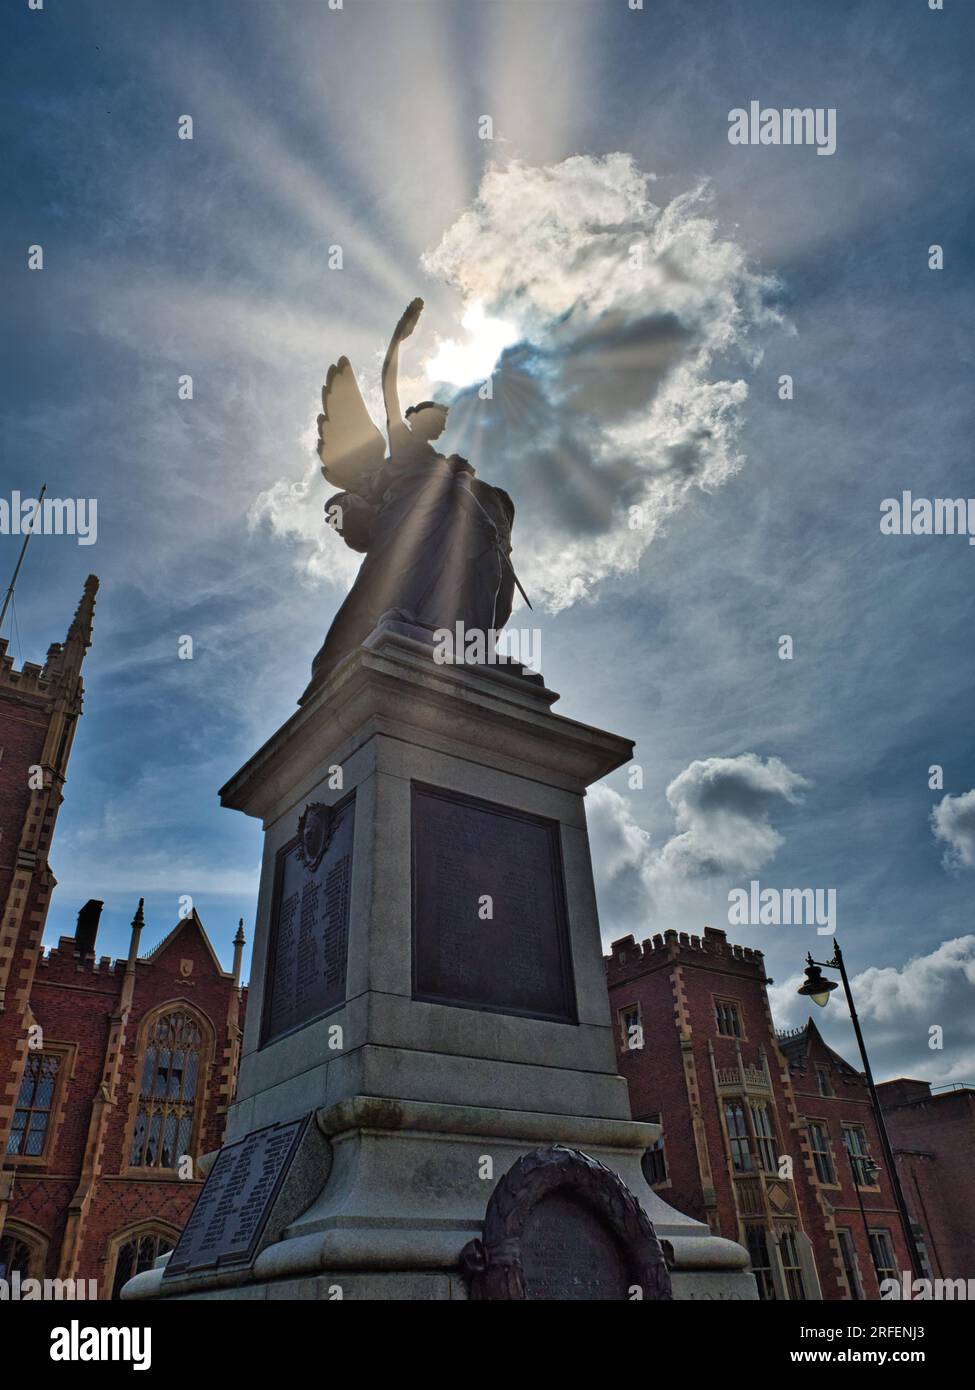 The War Memorial at The Queen's University Belfast, Northern Ireland.  This iconic memorial depicts the Angel of Mercy raising the Fallen Warrior.  Th Stock Photo